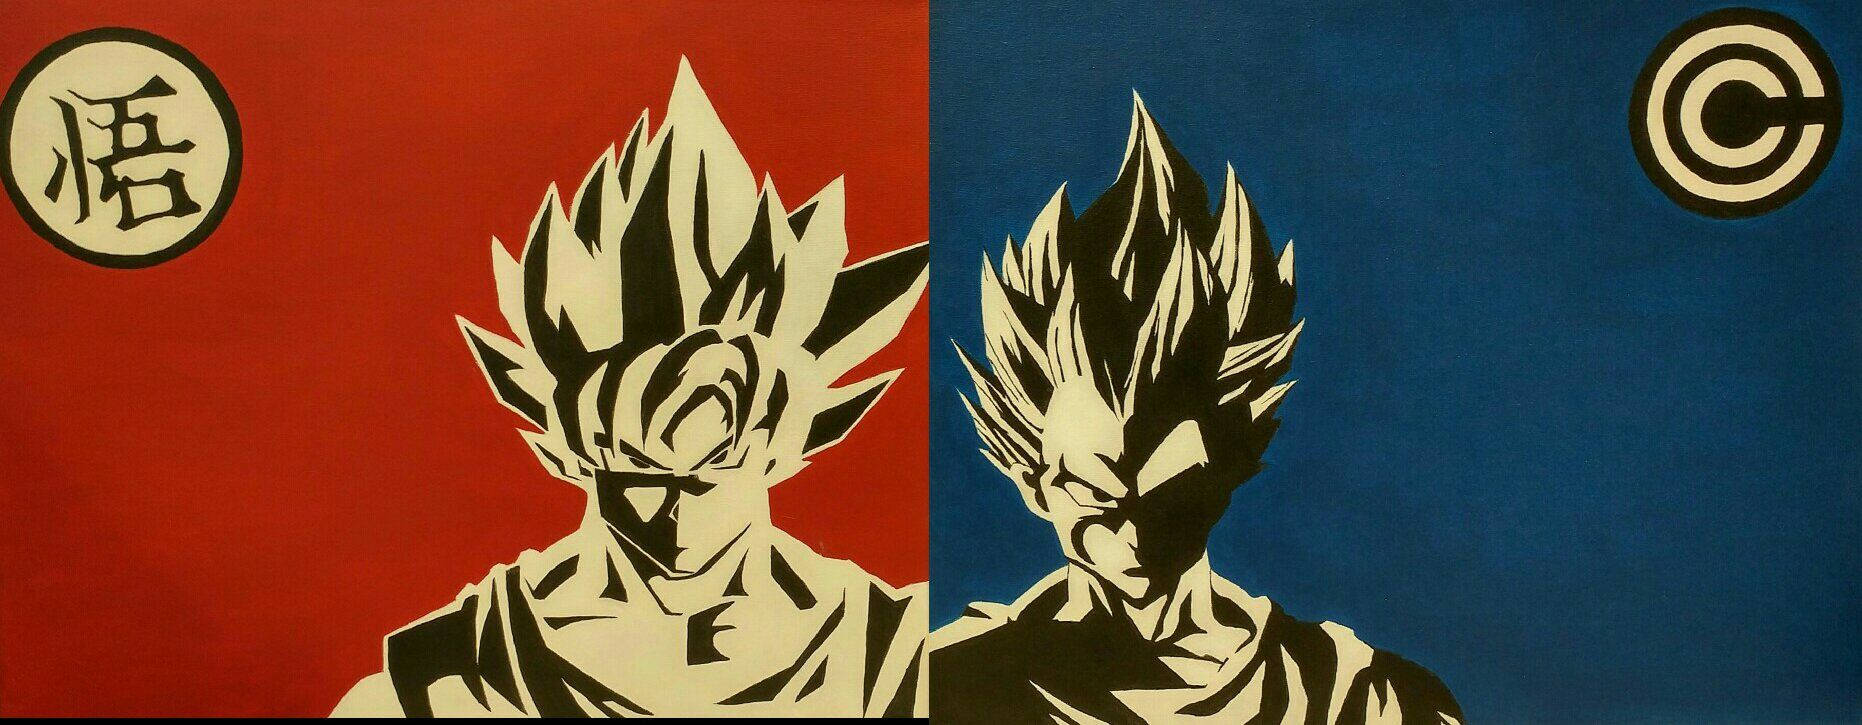 \"The Battle of the Ages, Goku and Vegeta\" Wallpaper